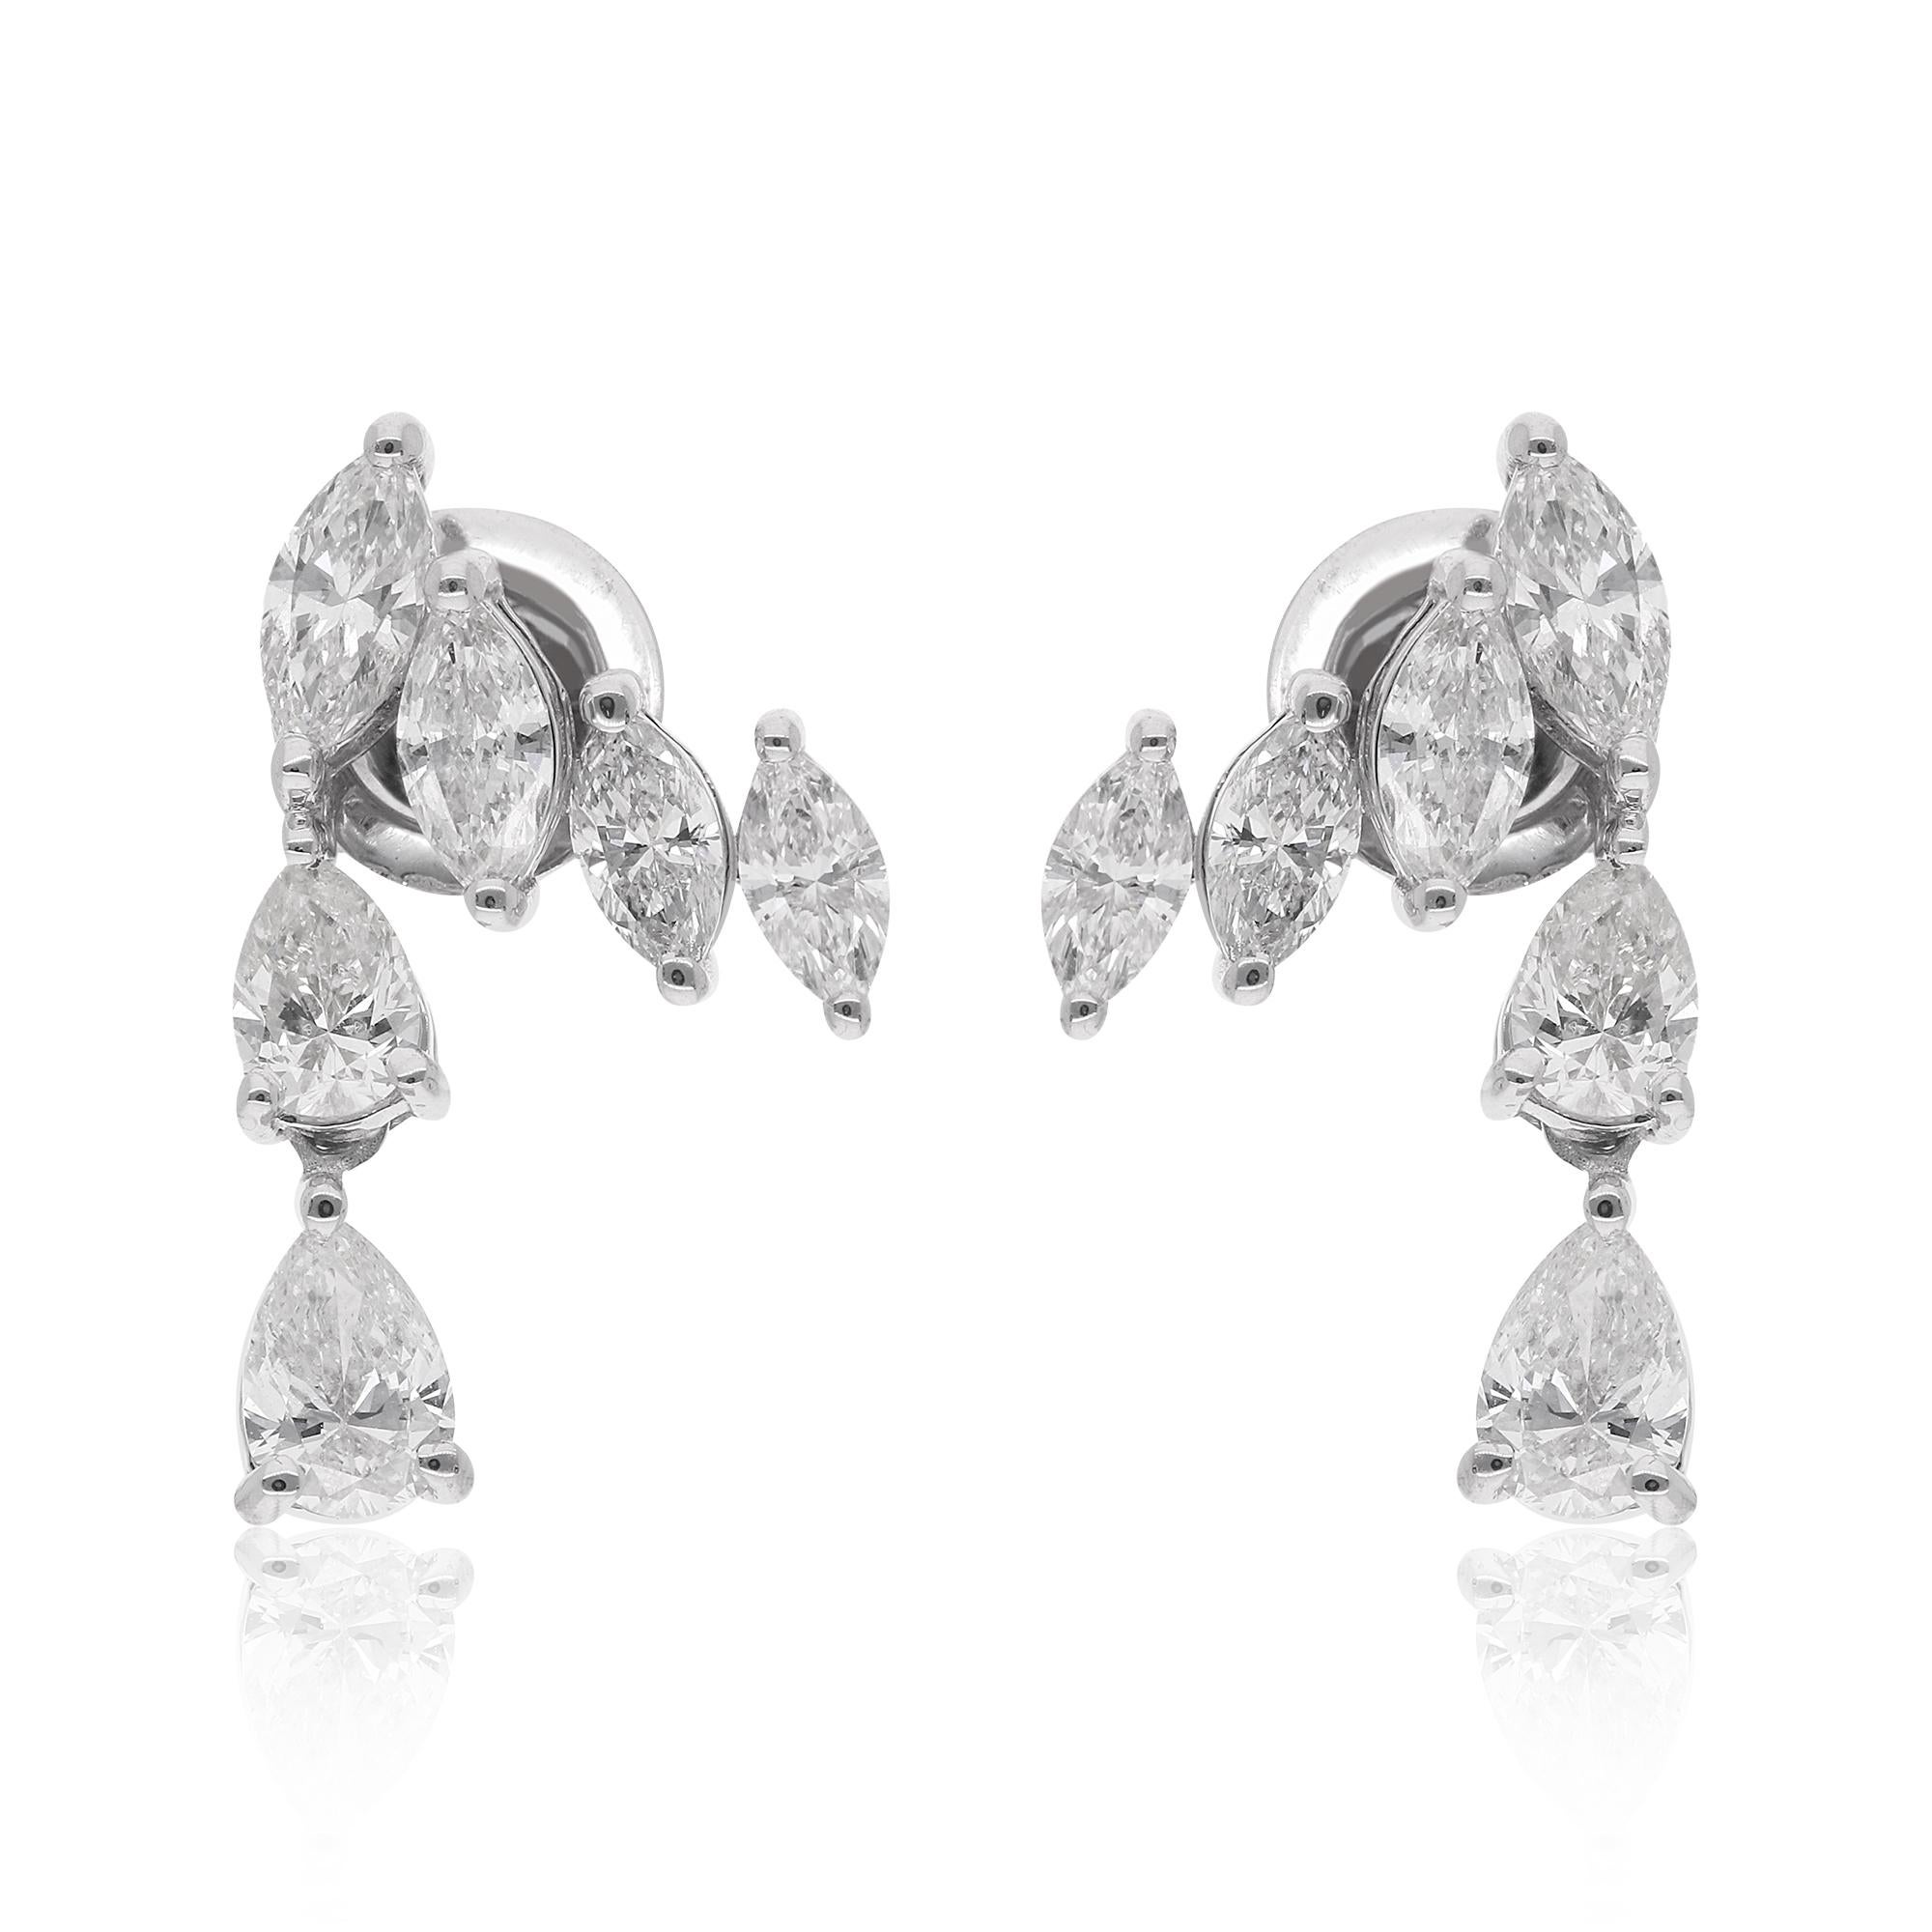 At the heart of each earring, a stunning pear-shaped diamond glimmers with ethereal brilliance, reflecting light in every direction with its pristine facets. These captivating pear diamonds are expertly complemented by gracefully arranged marquise